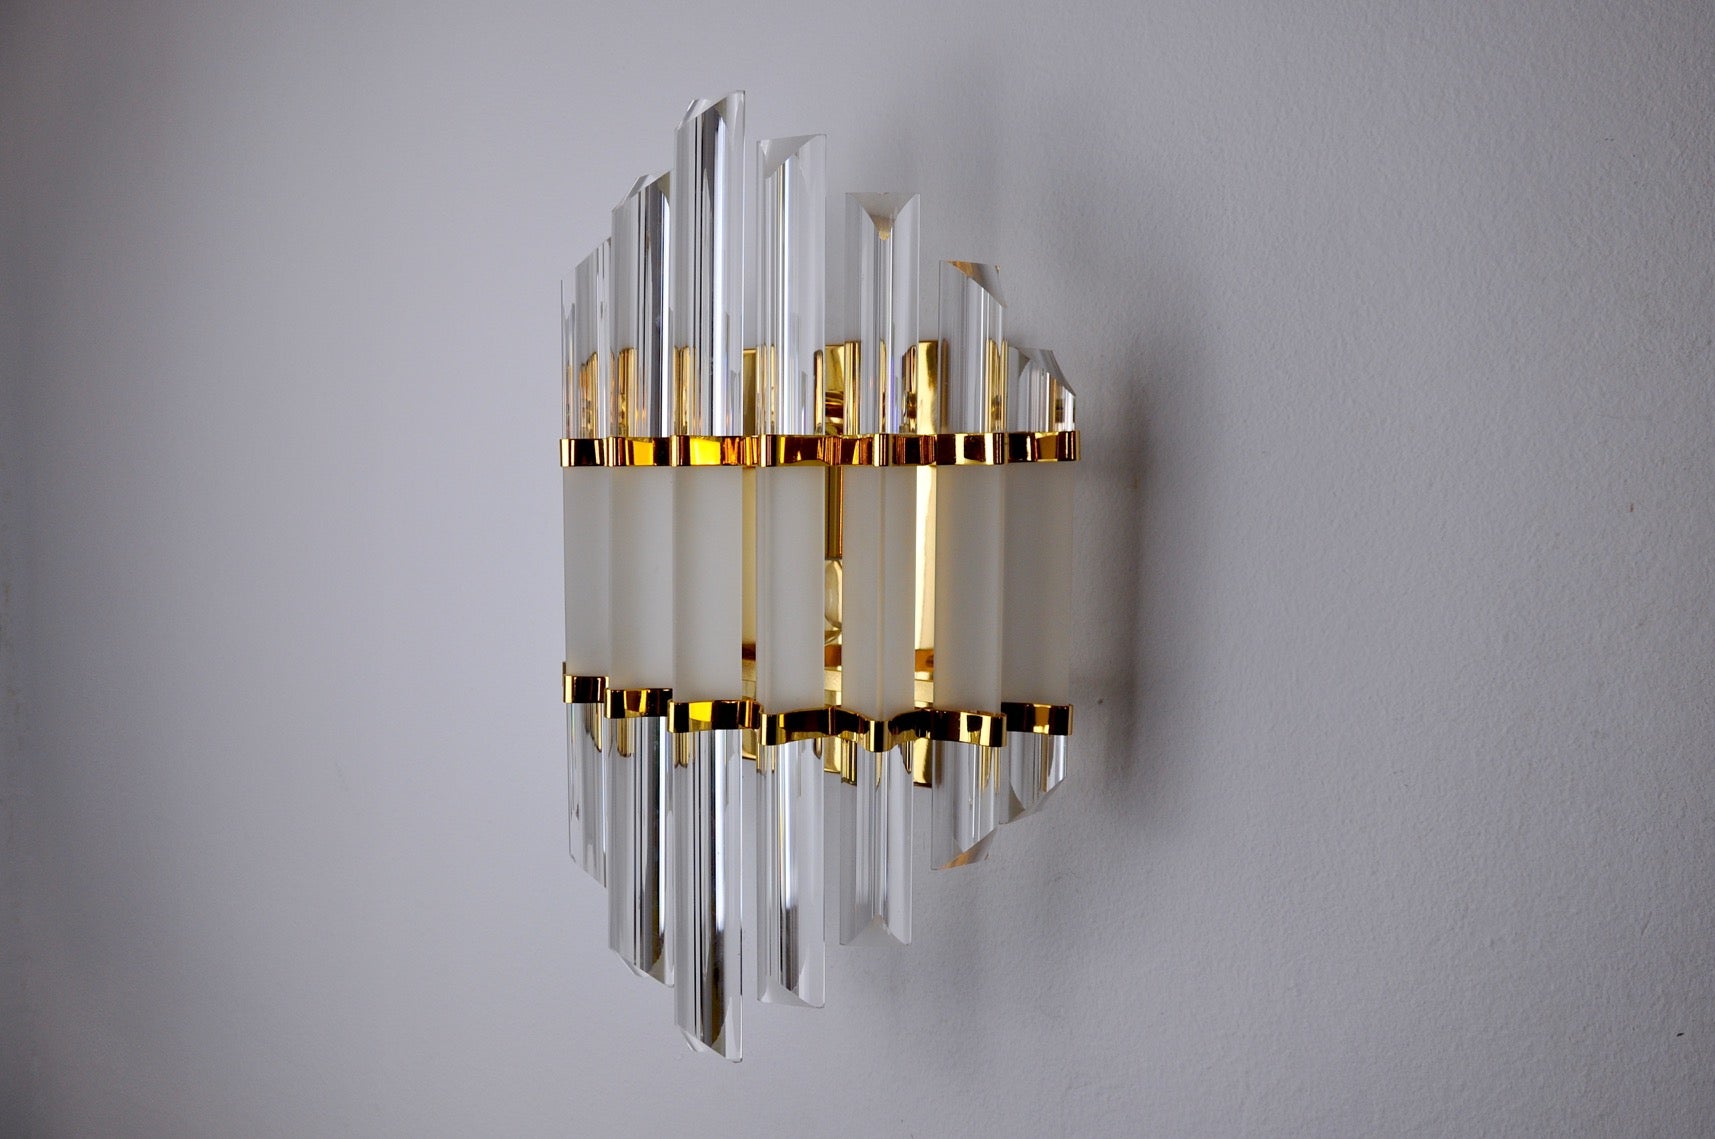 Large venini wall light from the 70s. Cut glass and gilt metal structure. Unique object that will illuminate and bring a real design touch to your interior. Electricity checked, mark of time relating to the age of the object. Easy installation,